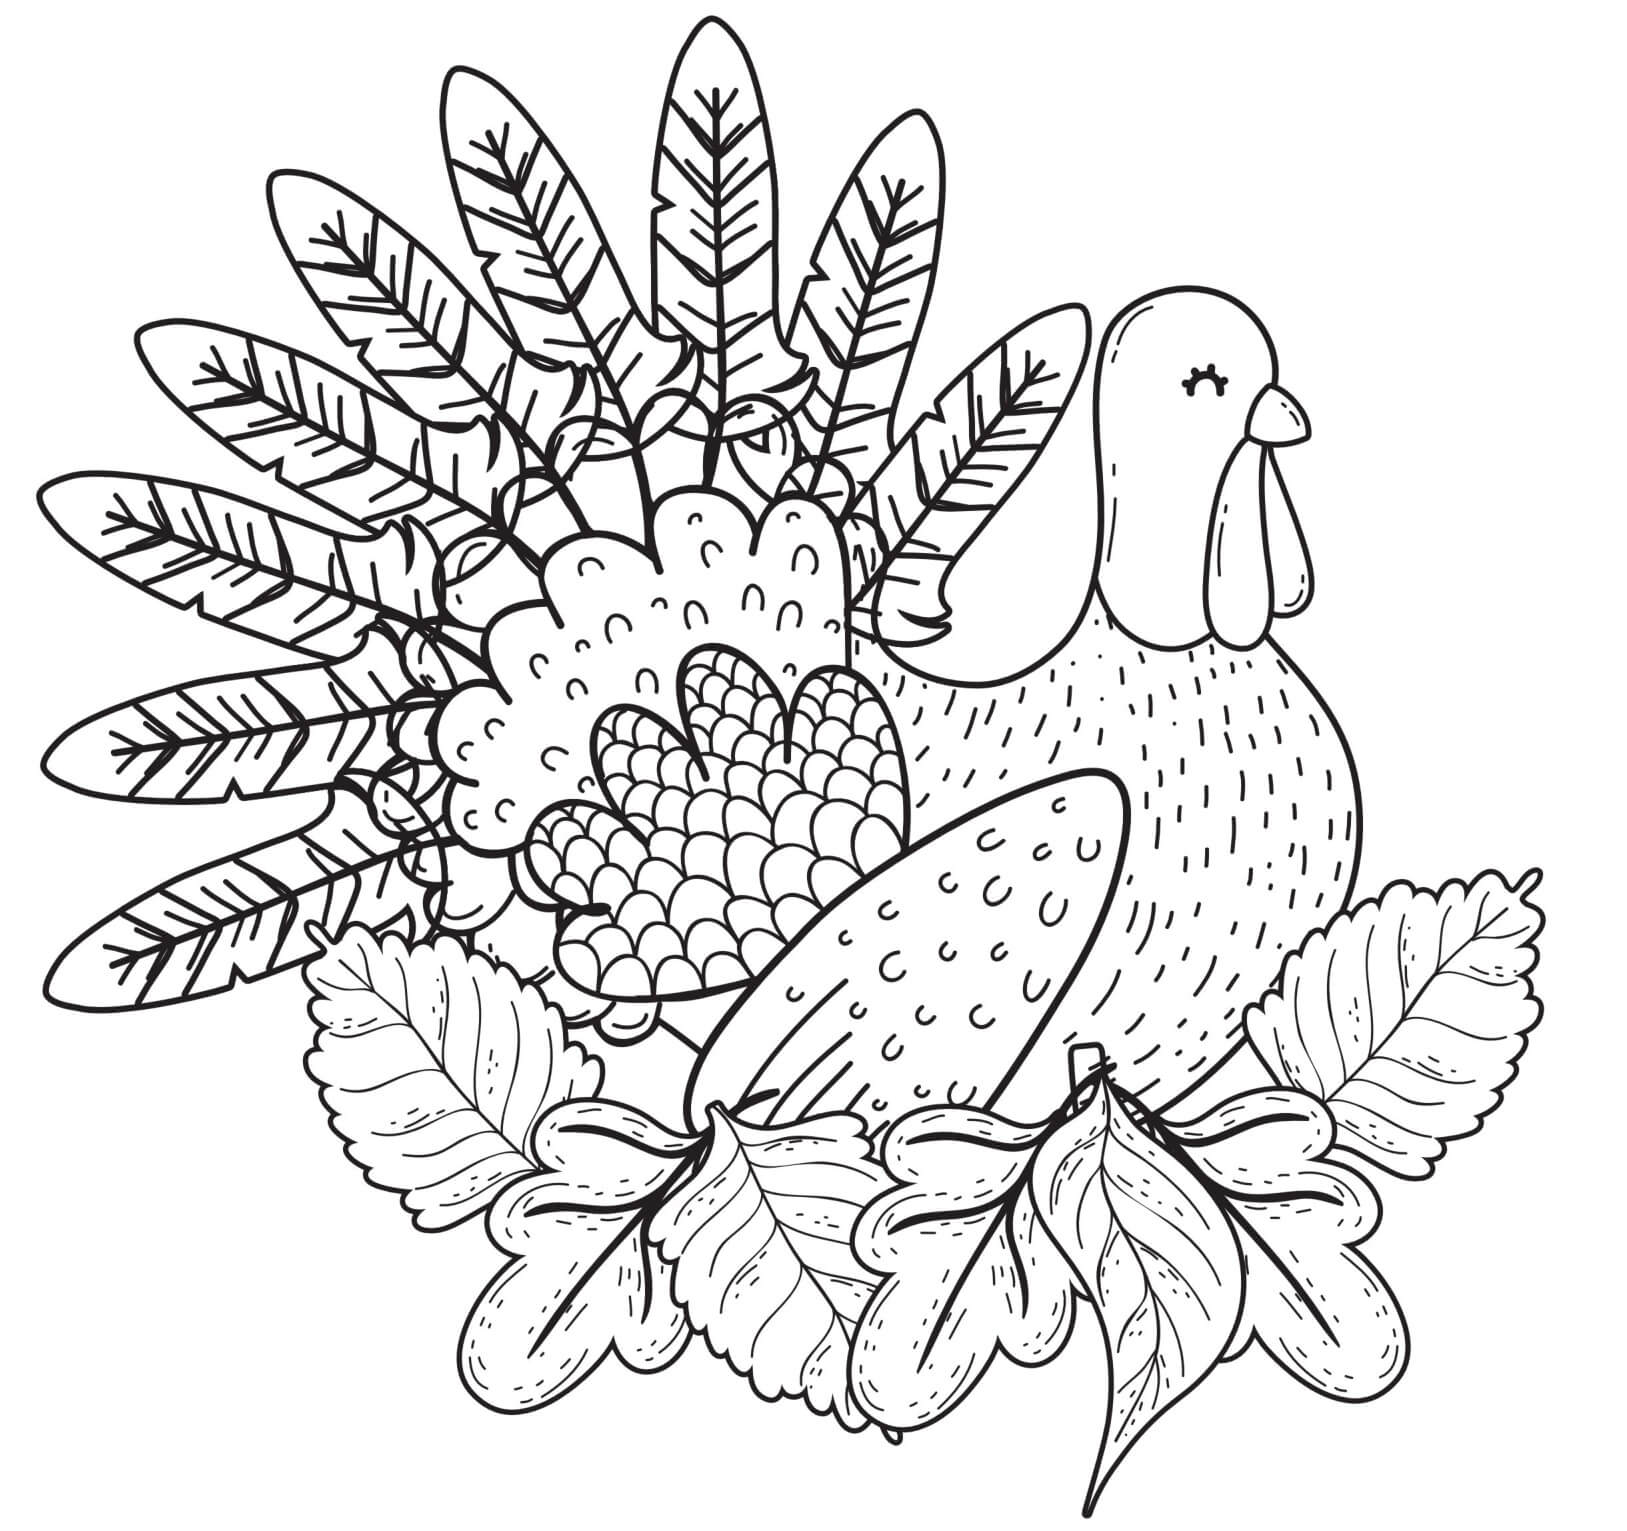 Turkey Sitting In Fall Leaves Coloring Page